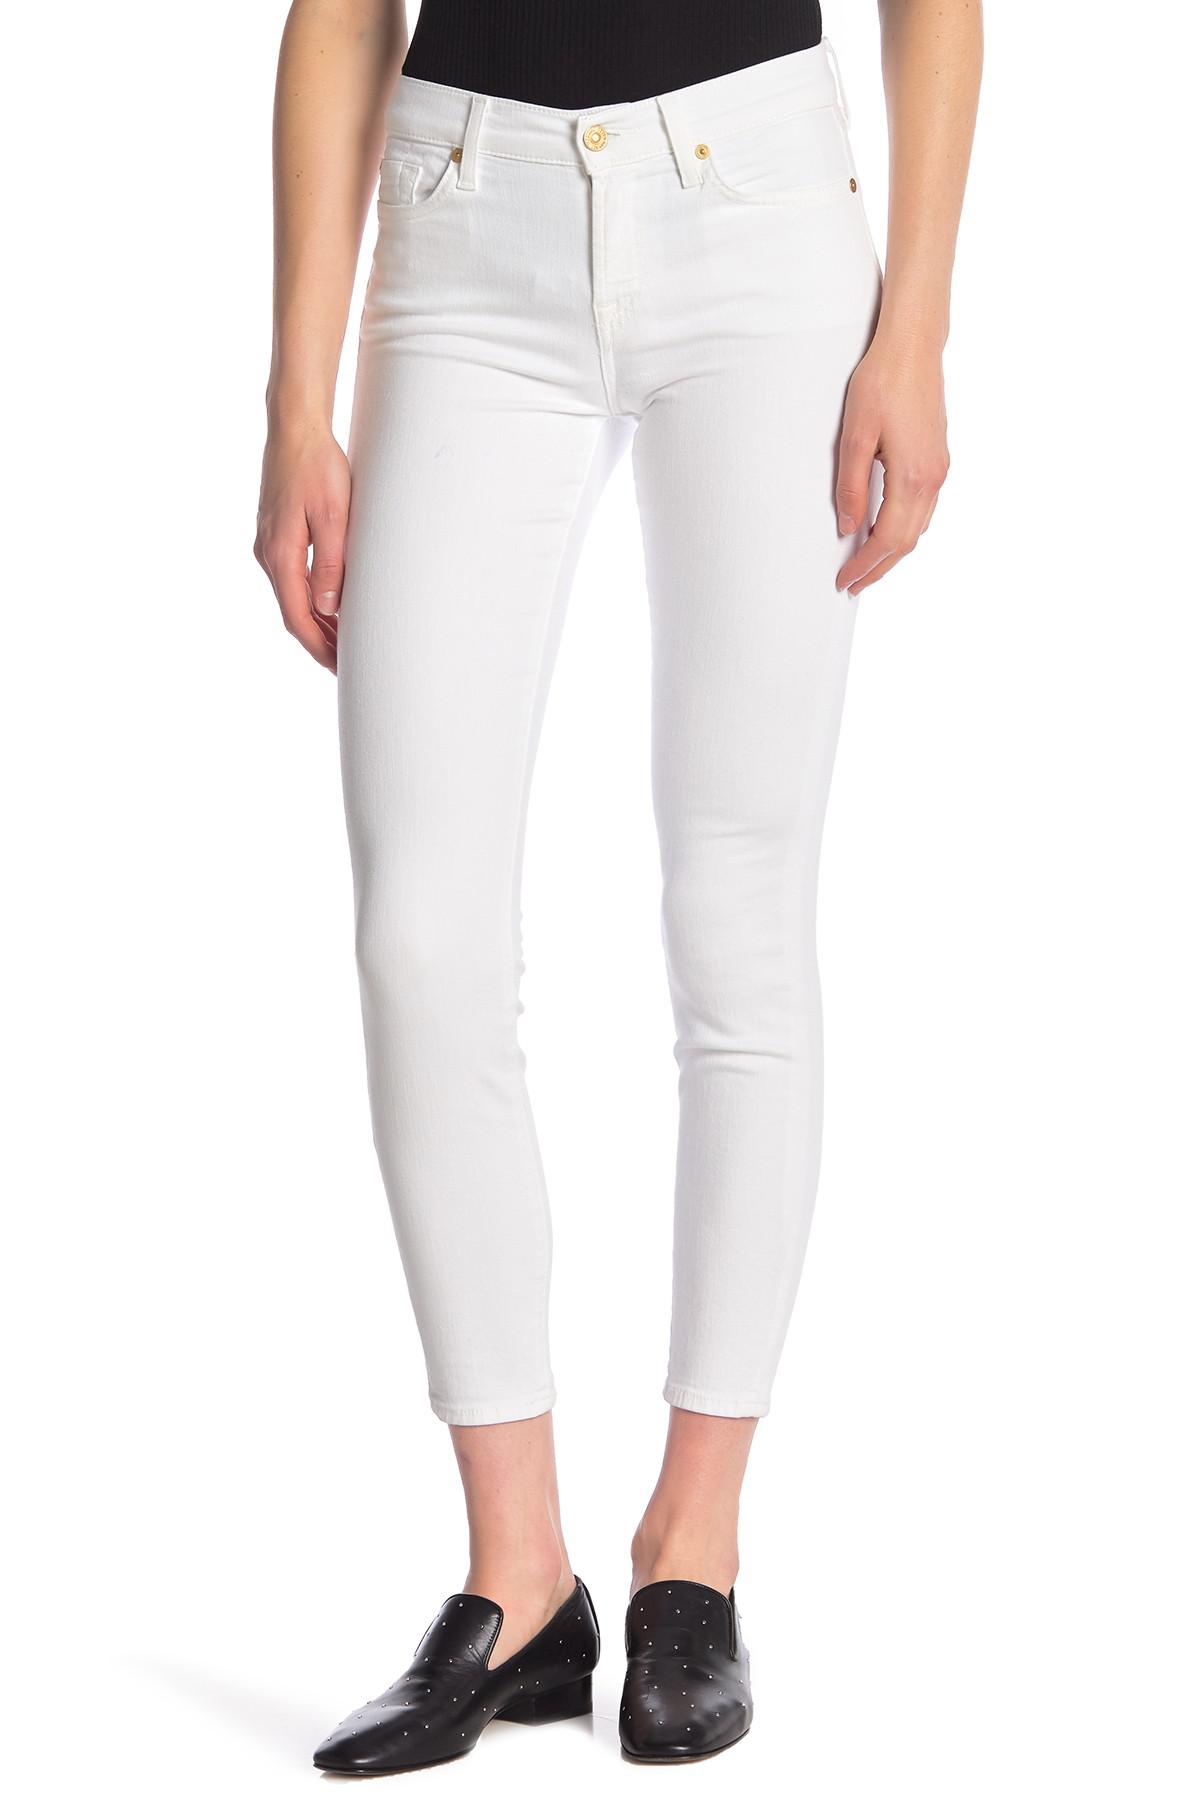 7 For All Mankind Denim High Waist Gwenevere Skinny Jeans in White - Lyst